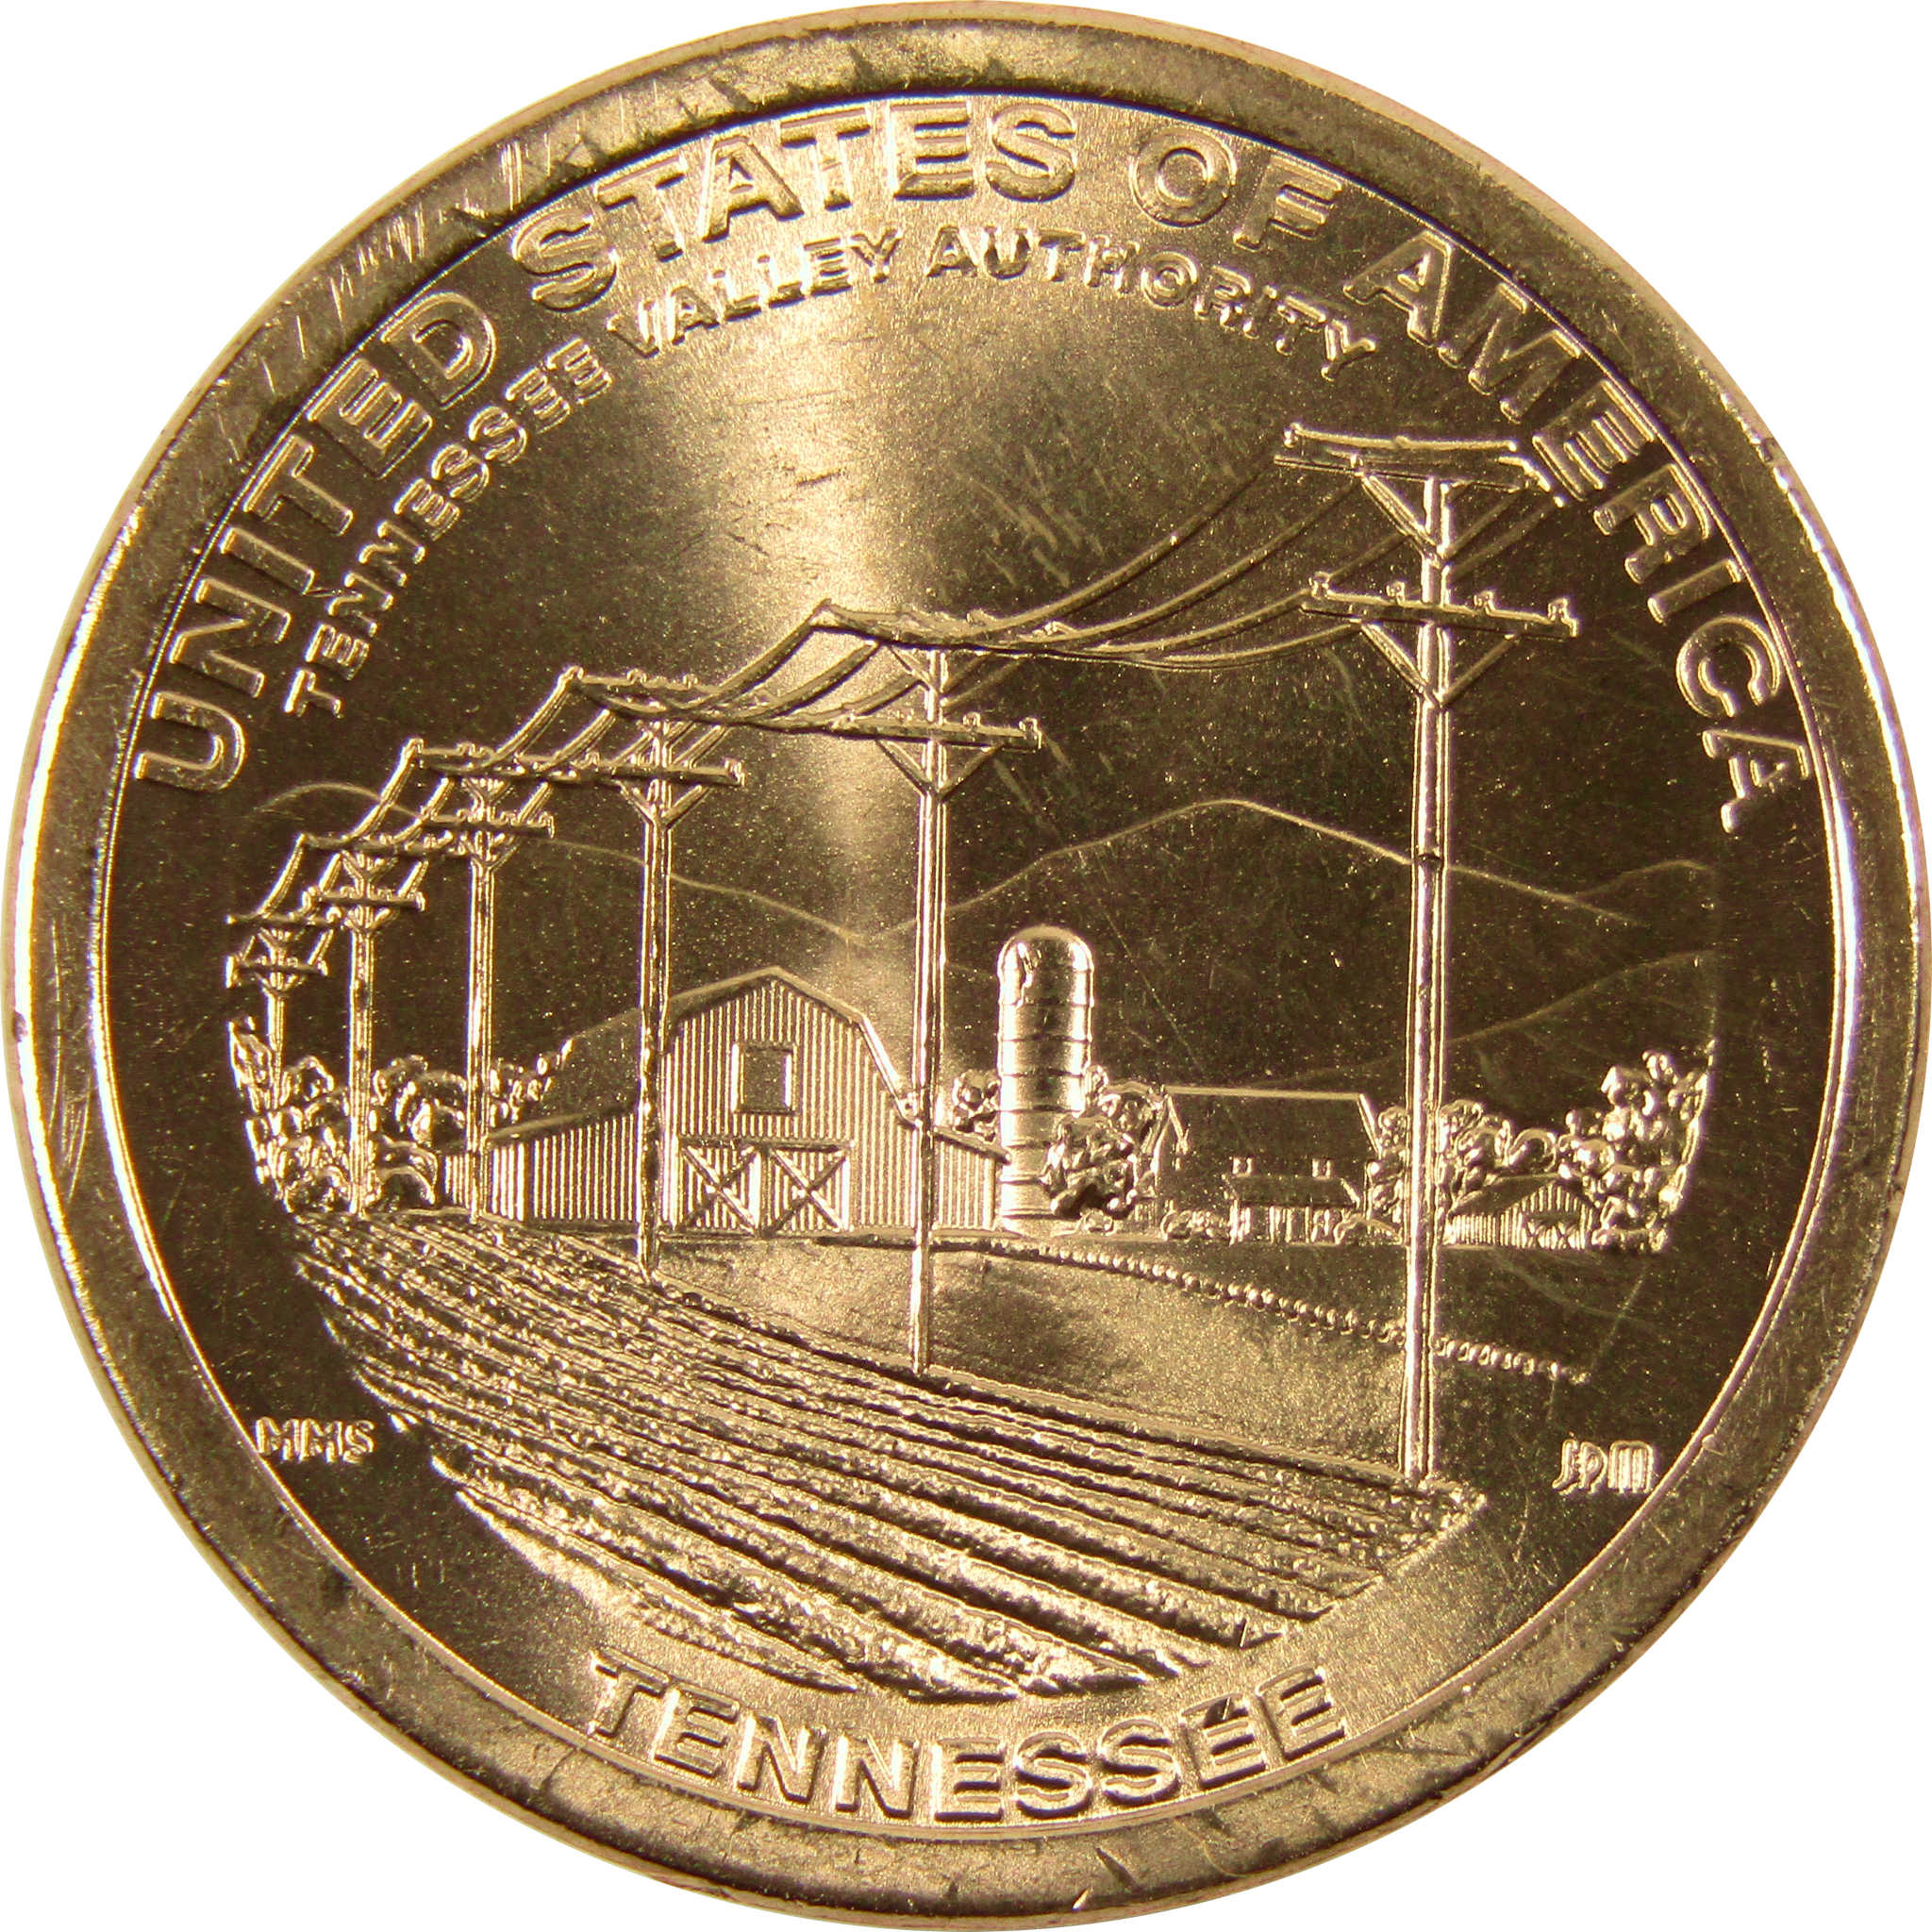 2022 P Tennessee Valley Authority American Innovation Uncirculated $1